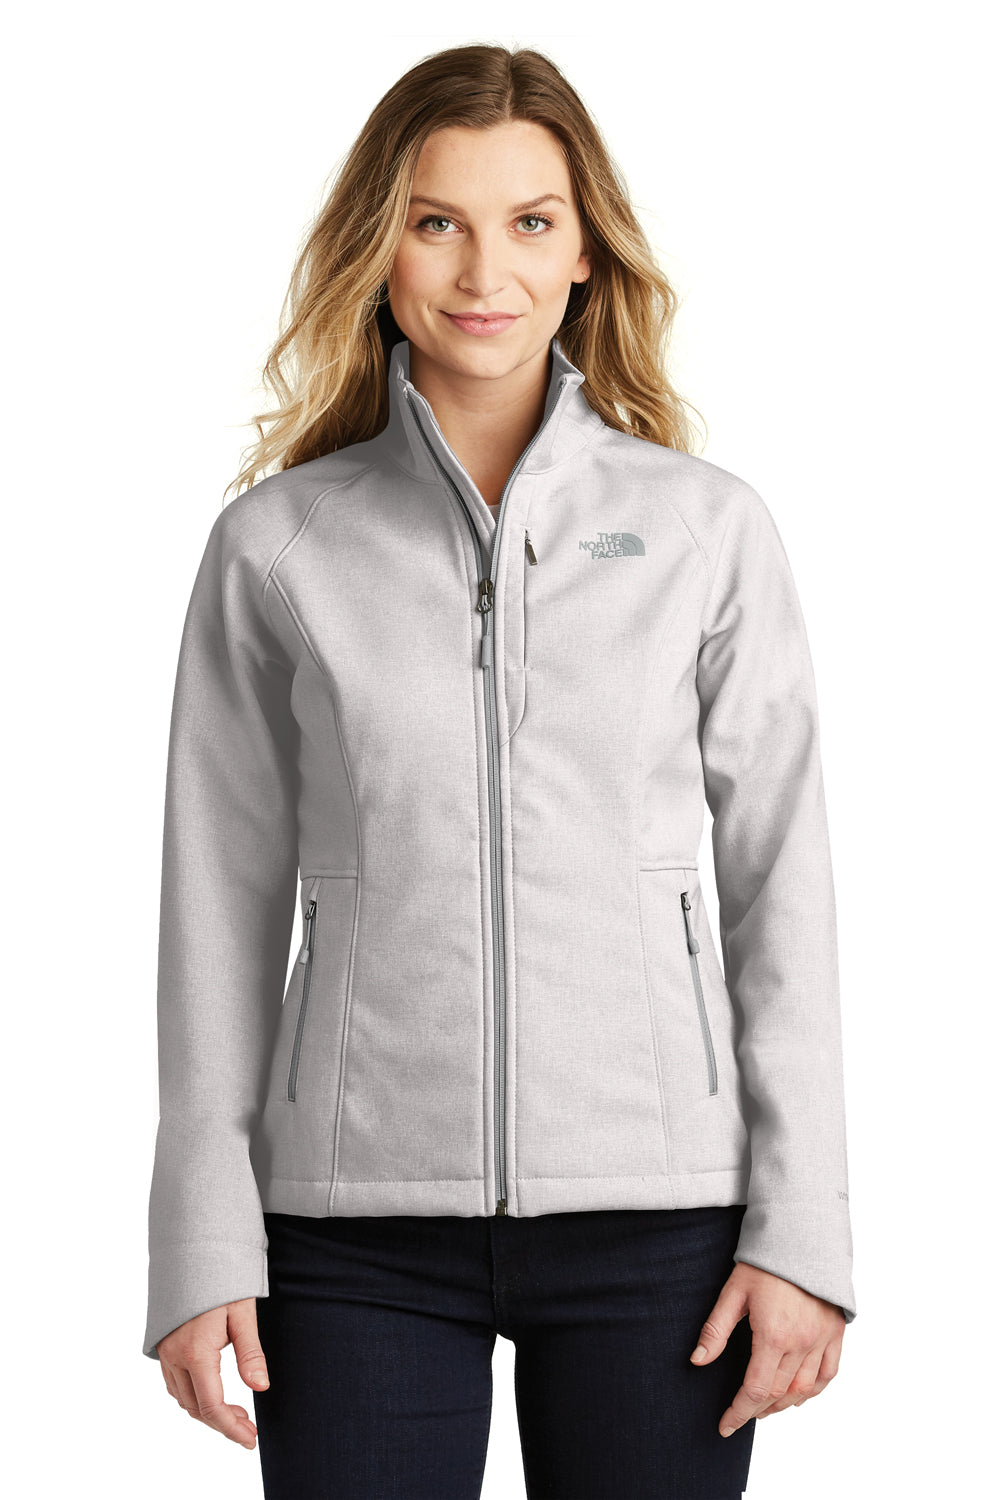 The North Face NF0A3LGU Womens Apex Barrier Wind & Resistant Full Zip Jacket Heather Light Grey Front